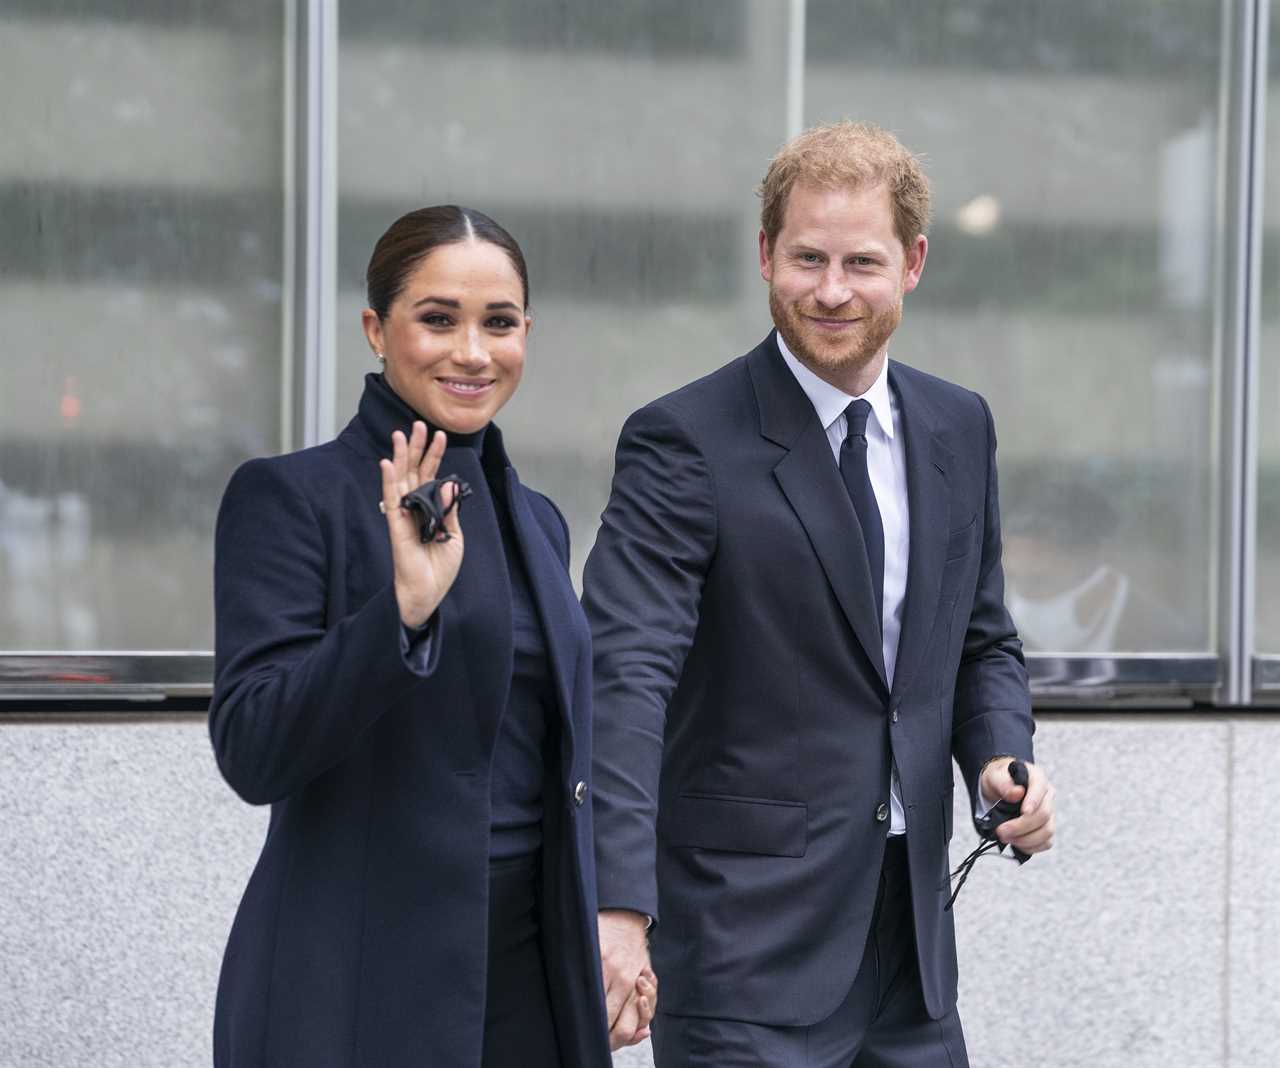 Meghan Markle ditched her ‘principles’ to get ahead – and now sneers at women for doing the same, says Ulrika Jonsson